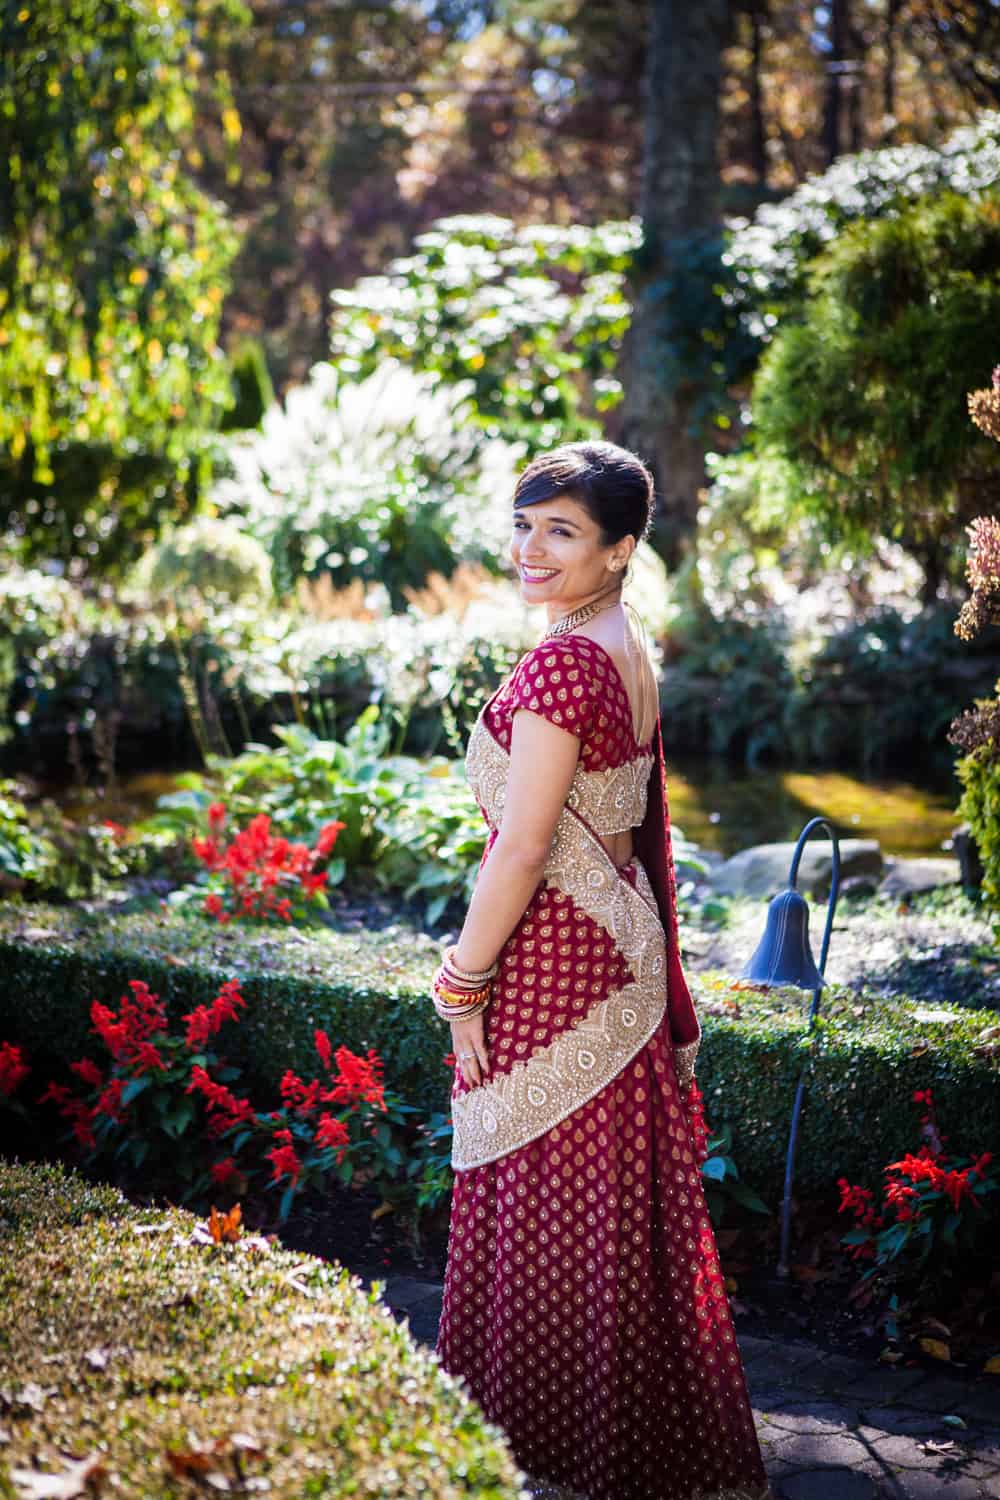 Bride in garden wearing red traditional sari at an East Wind Inn wedding